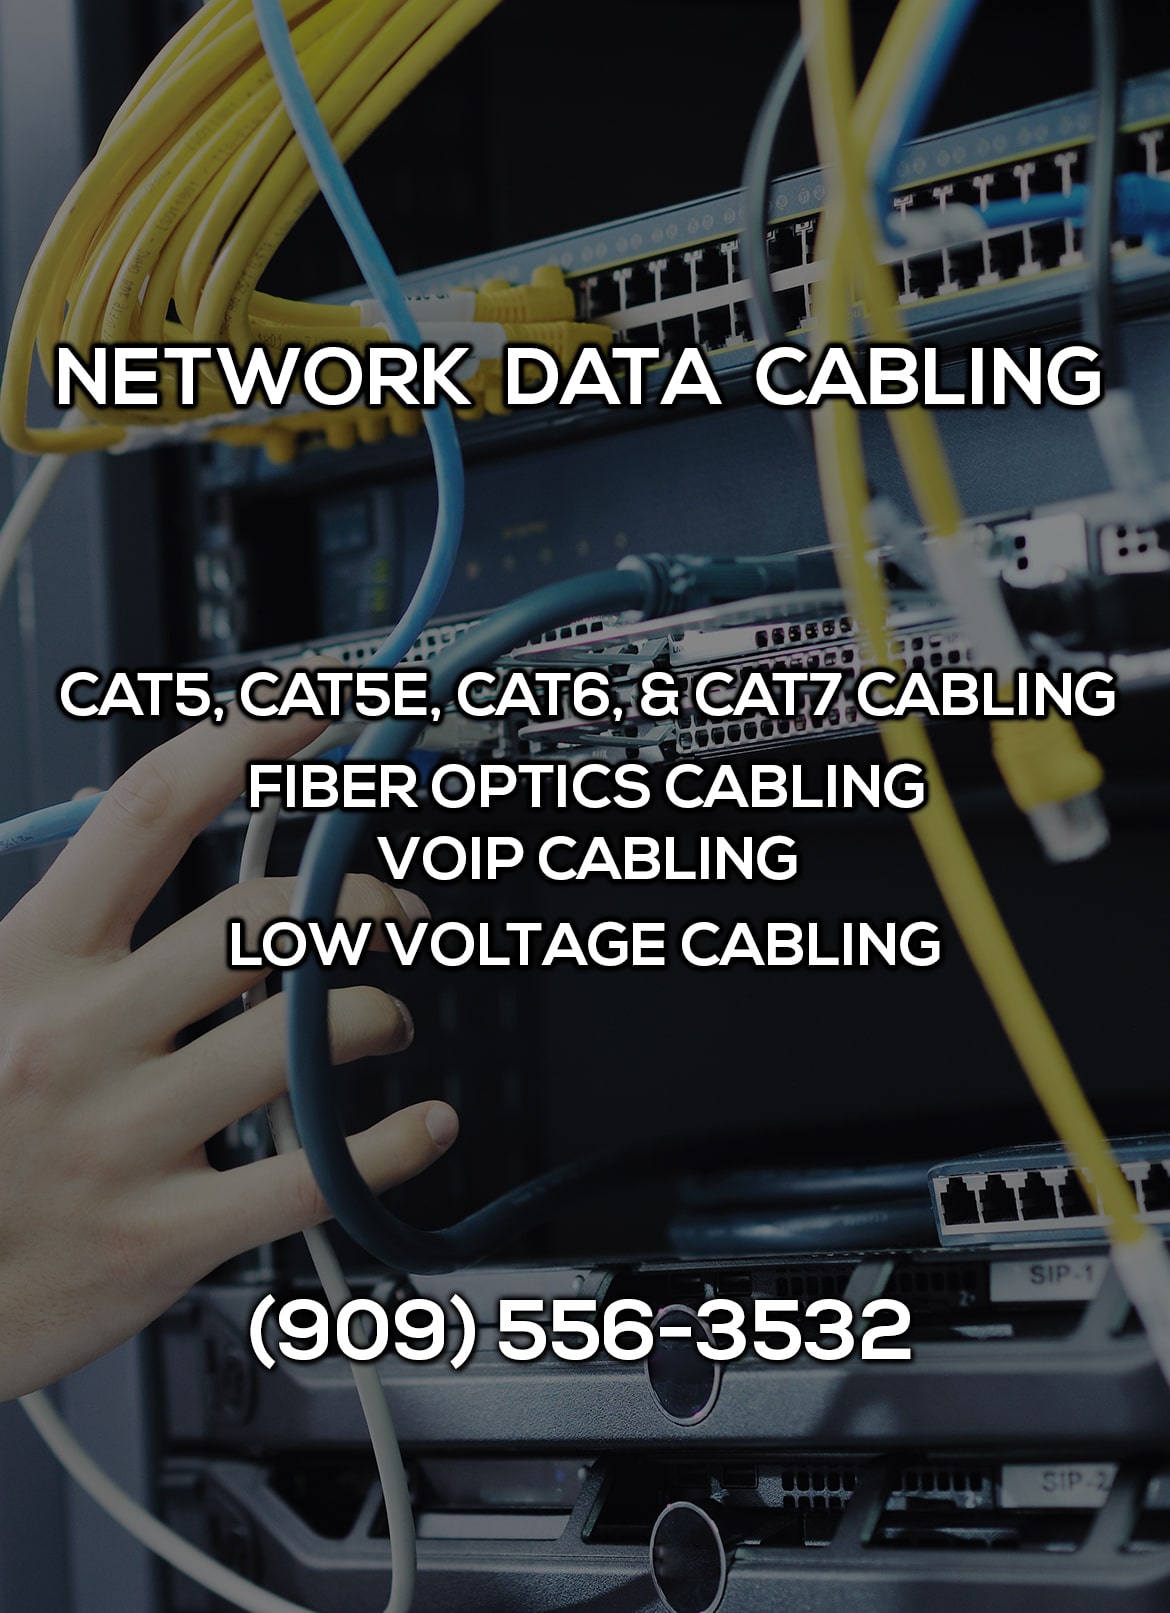 Network Data Cabling in Chino Hills CA